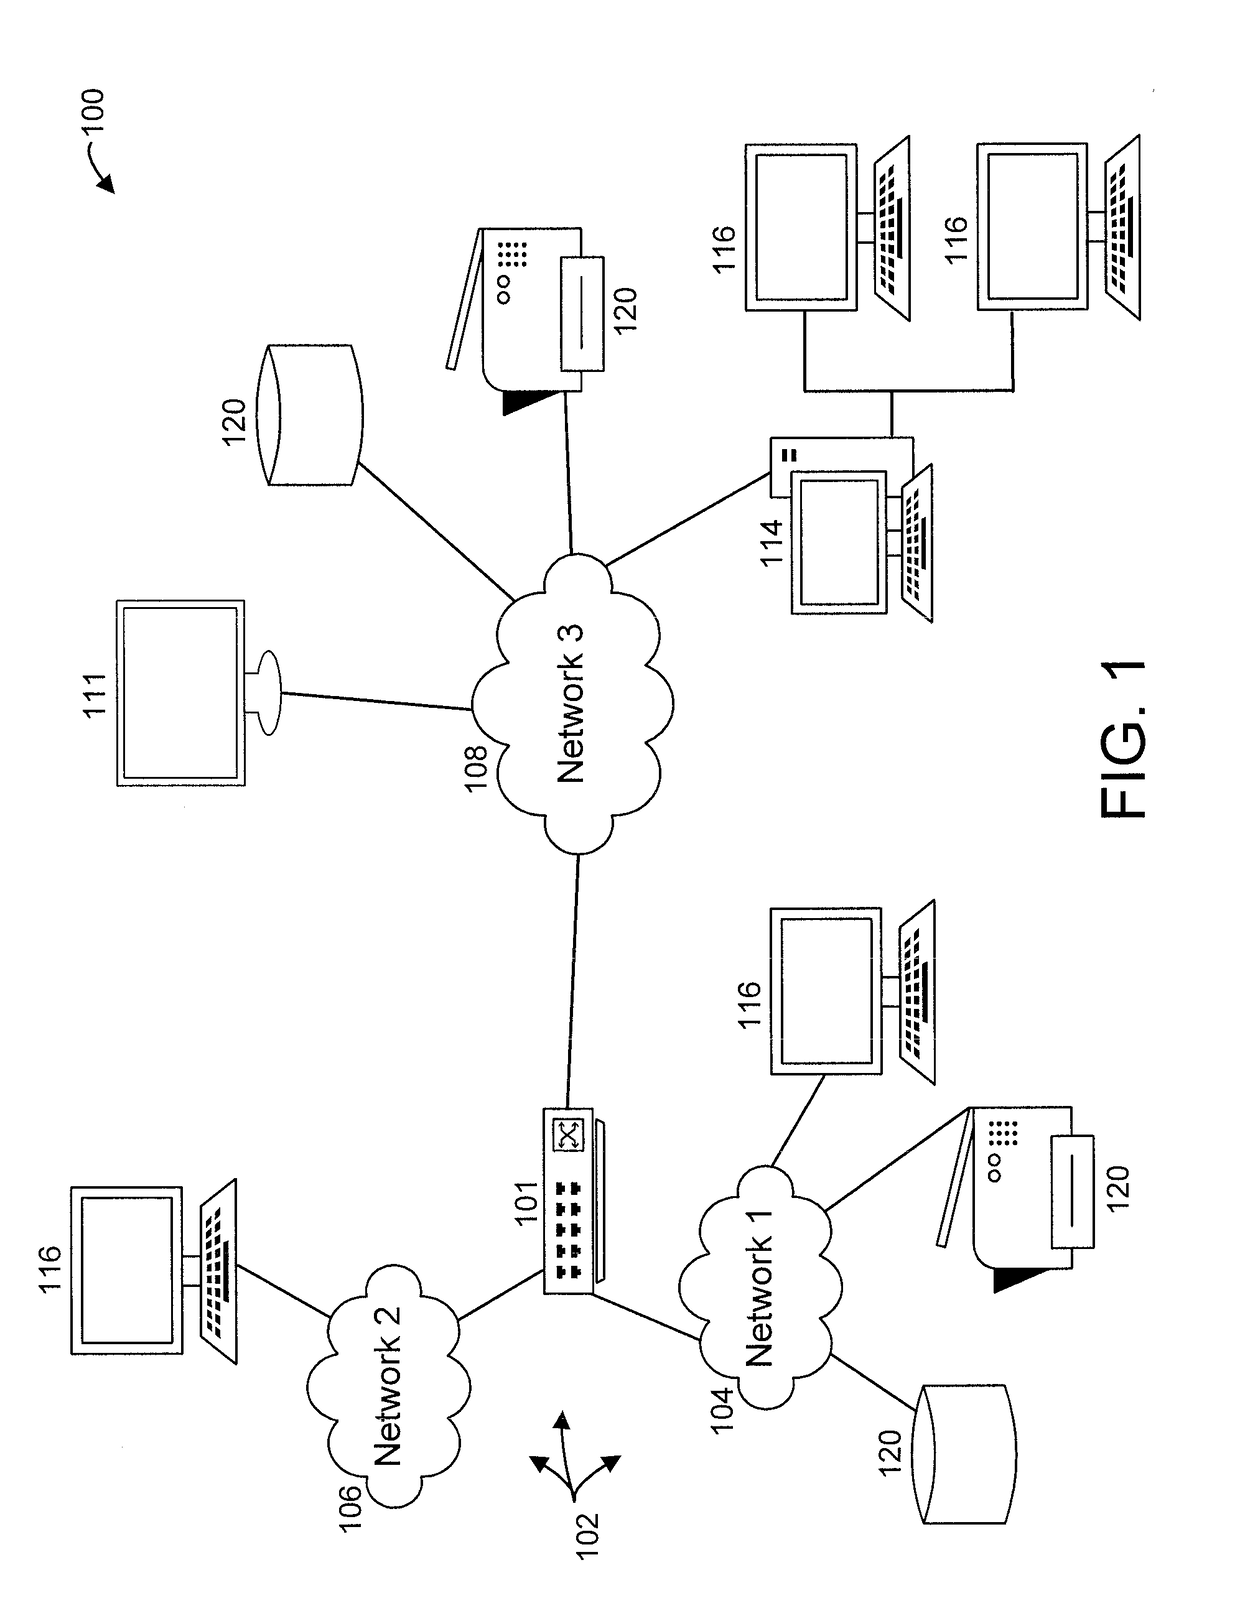 Scalable end-to-end quality of service monitoring and diagnosis in software defined networks